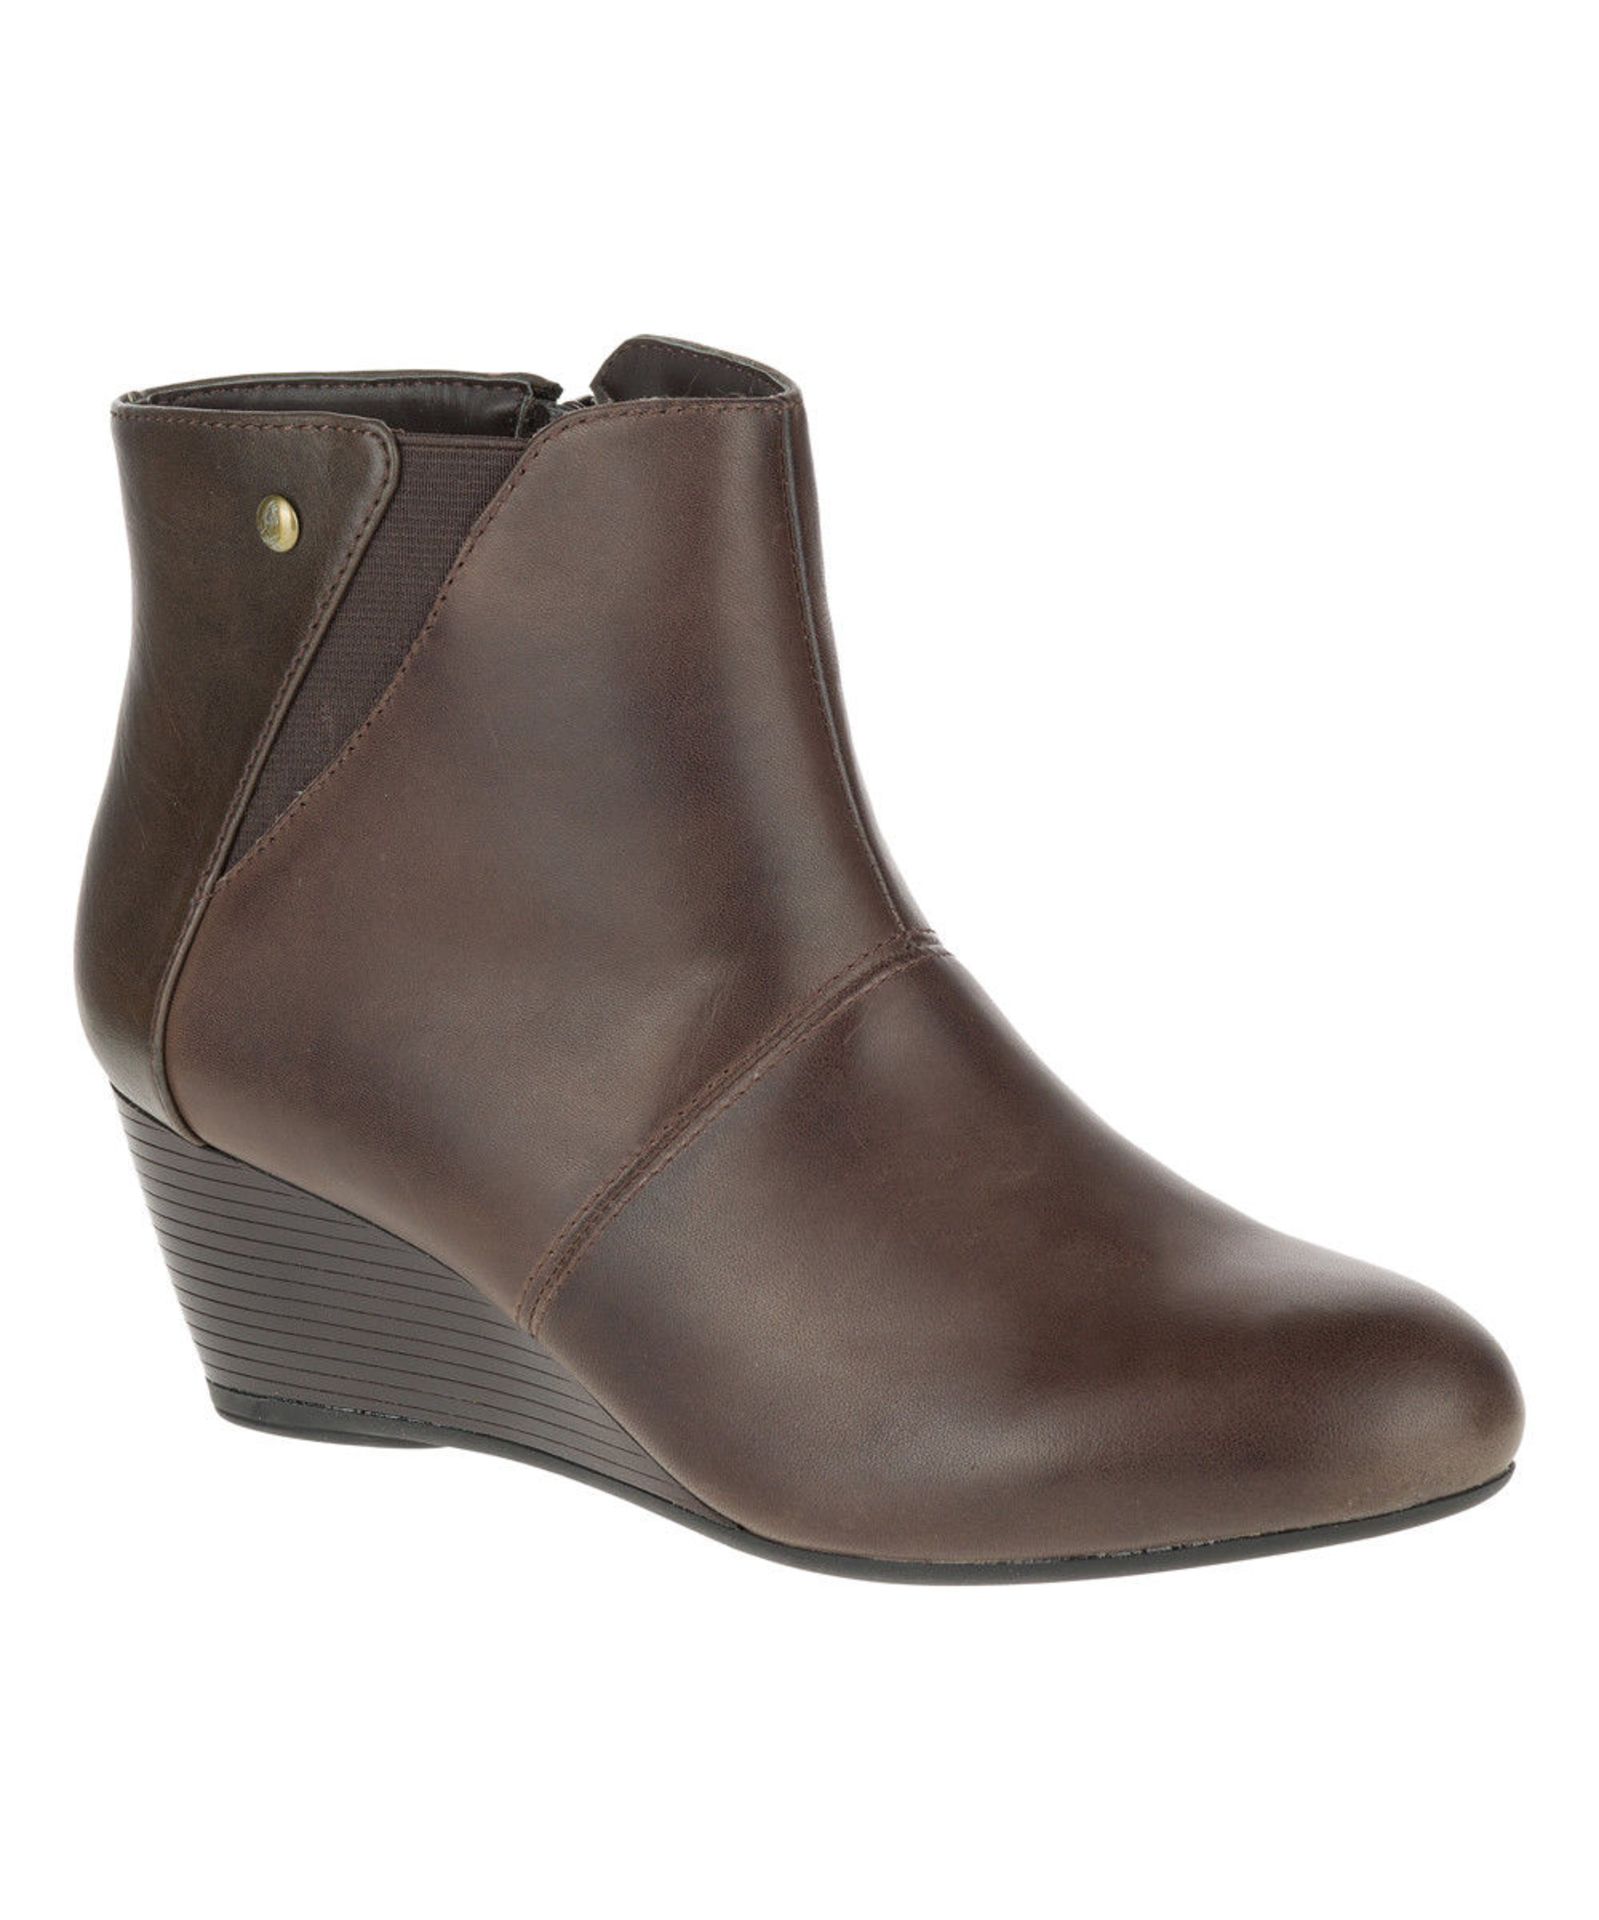 Hush Puppies Dark Brown Poised Rhea Leather Ankle Boot (Uk Size 3.5:Us Size 5.5) (New with box) [